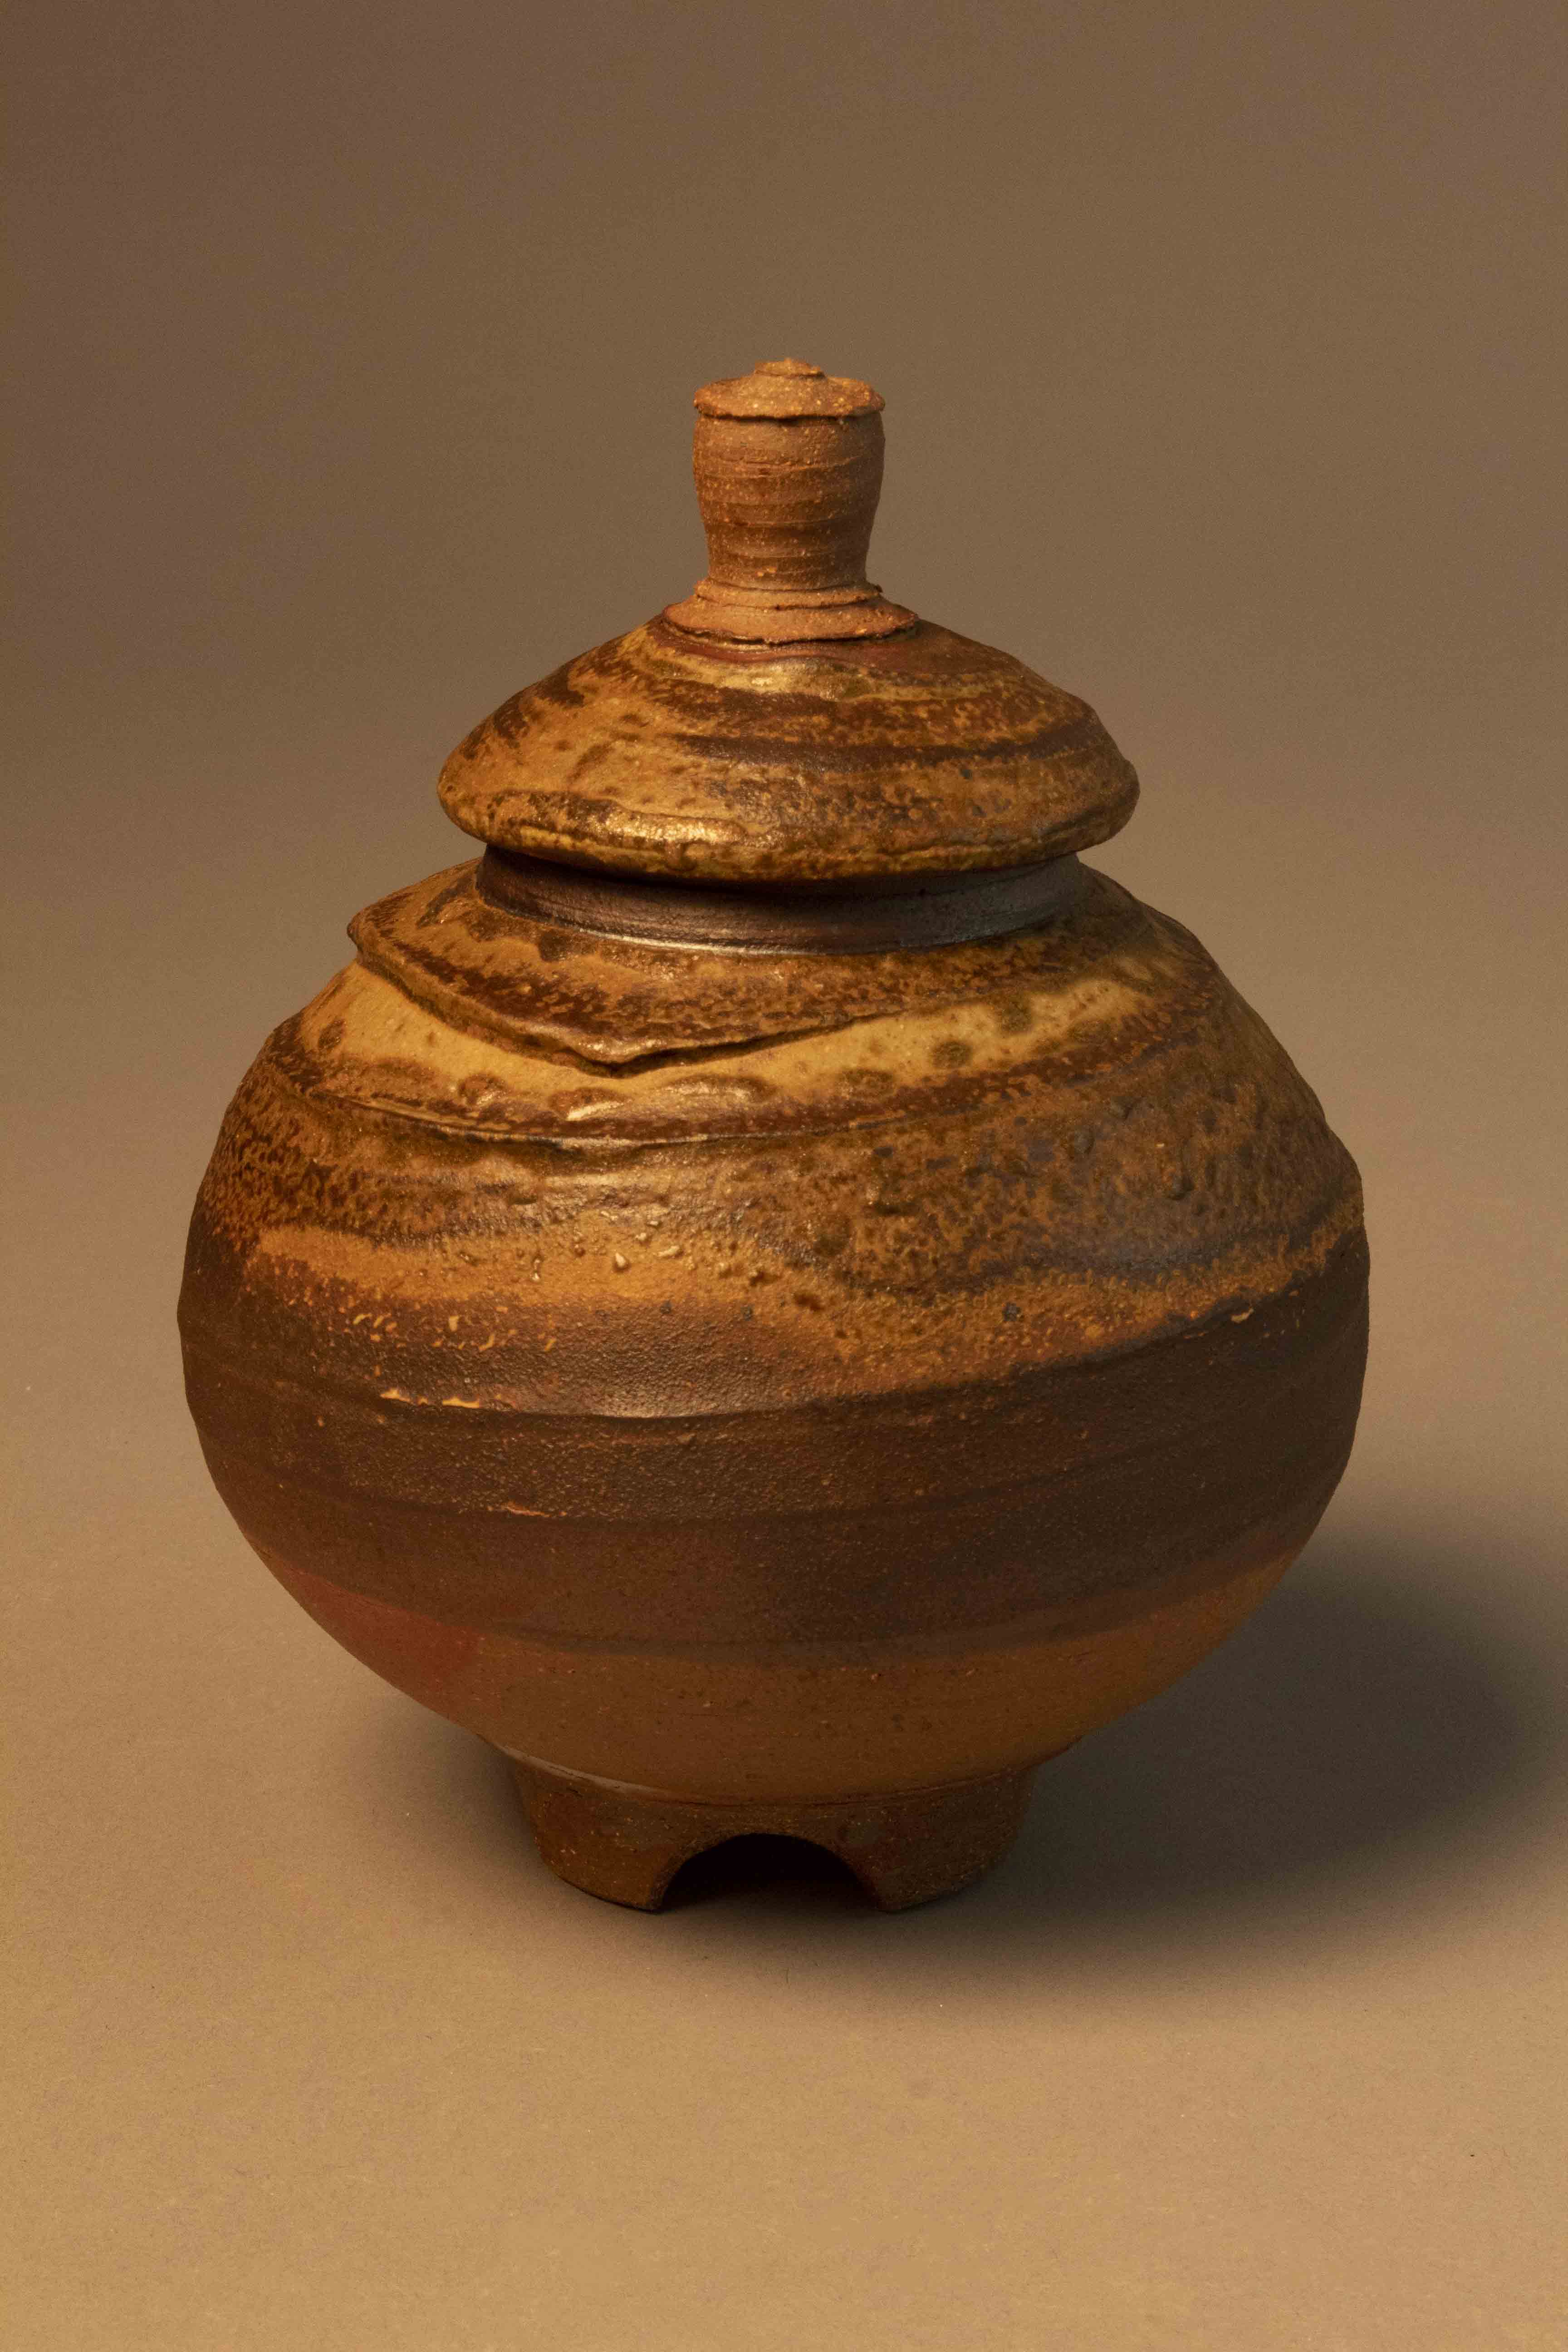 A jar with a pronounced rounded belly, a trimmed foot, and a lid that is shaped like a conical hat and is topped by a knob. The stoneware body is groggy and more course than the porcelain. The surface has been textured with slip so raised ridges spiral around the body of the jar as well as the exterior of the lid. Over this, a wood-ash based slip has been sprayed causing an uneven fluxing. The resulting surface has portions that feel drier while others may be smooth to the touch. The foot and the funnel-shaped knob are unglazed.